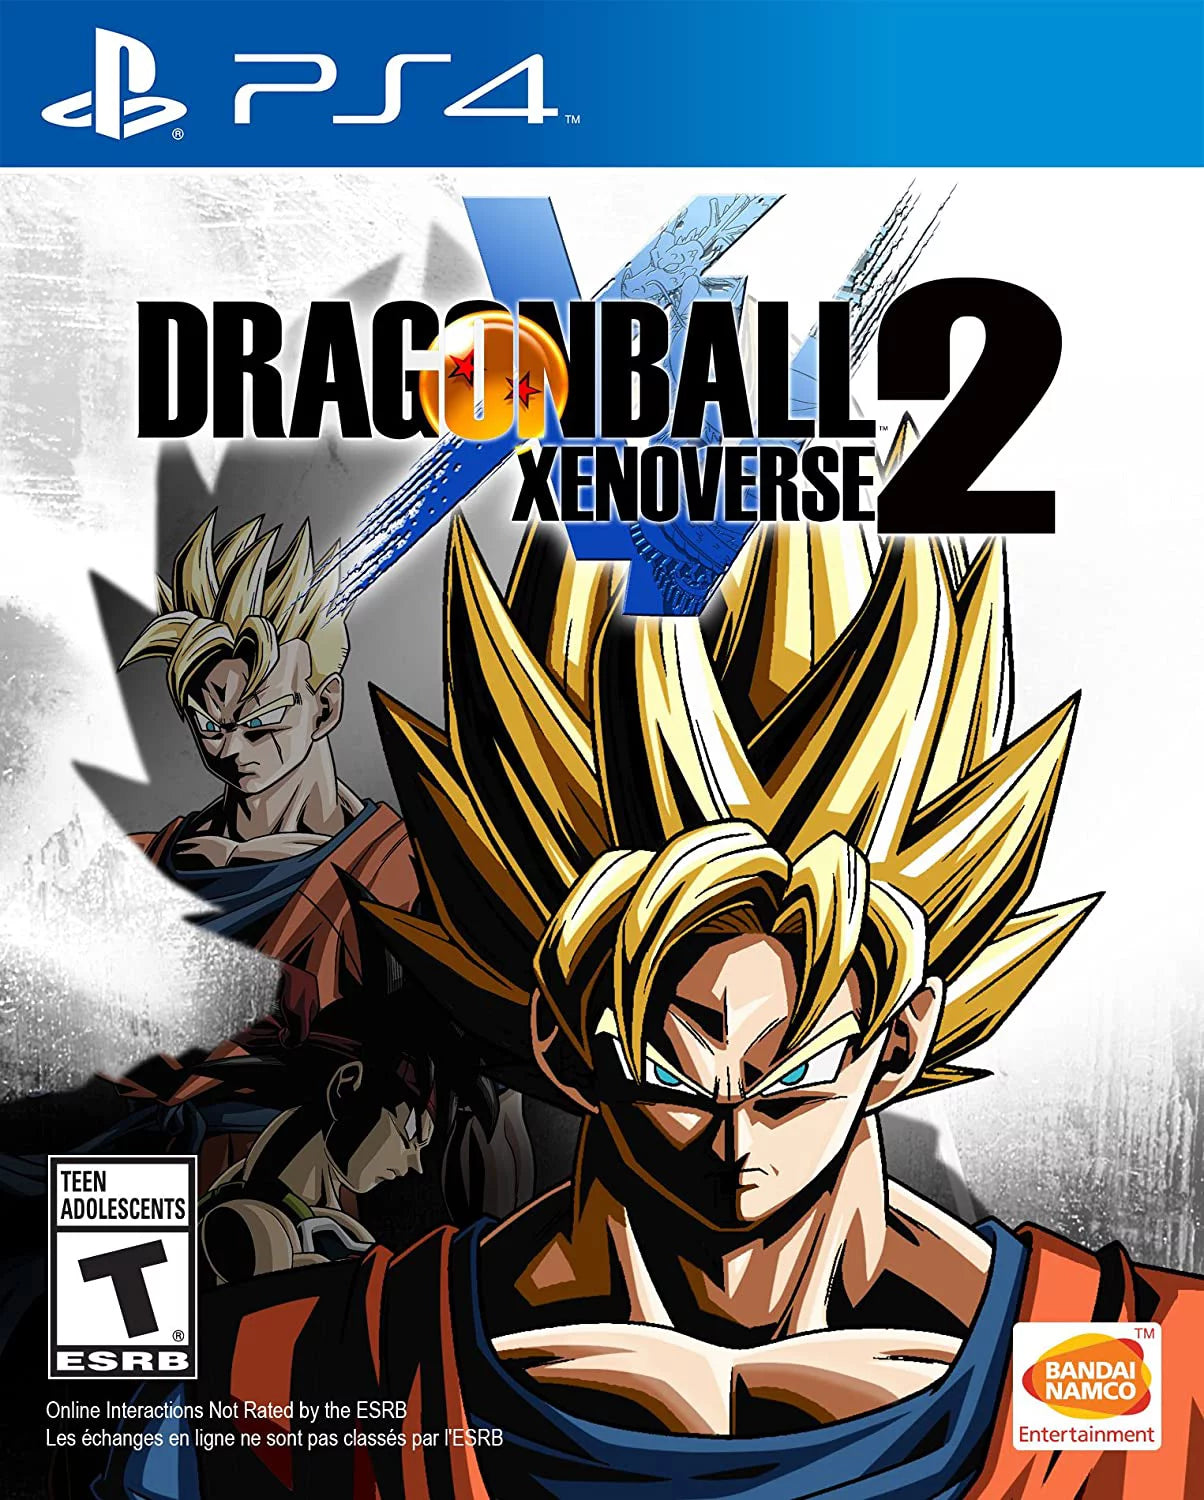 [EU] [PS4 Save Progression] - Dragon Ball Xenoverse 2 Modded Save with 3 CaC Akirac Other Mods Seasonal and Non Seasonal Save Mod - Modded Items and Gear - Hacks - Cheats - Trainers for Playstation 4 - Playstation 5 - Nintendo Switch - Xbox One